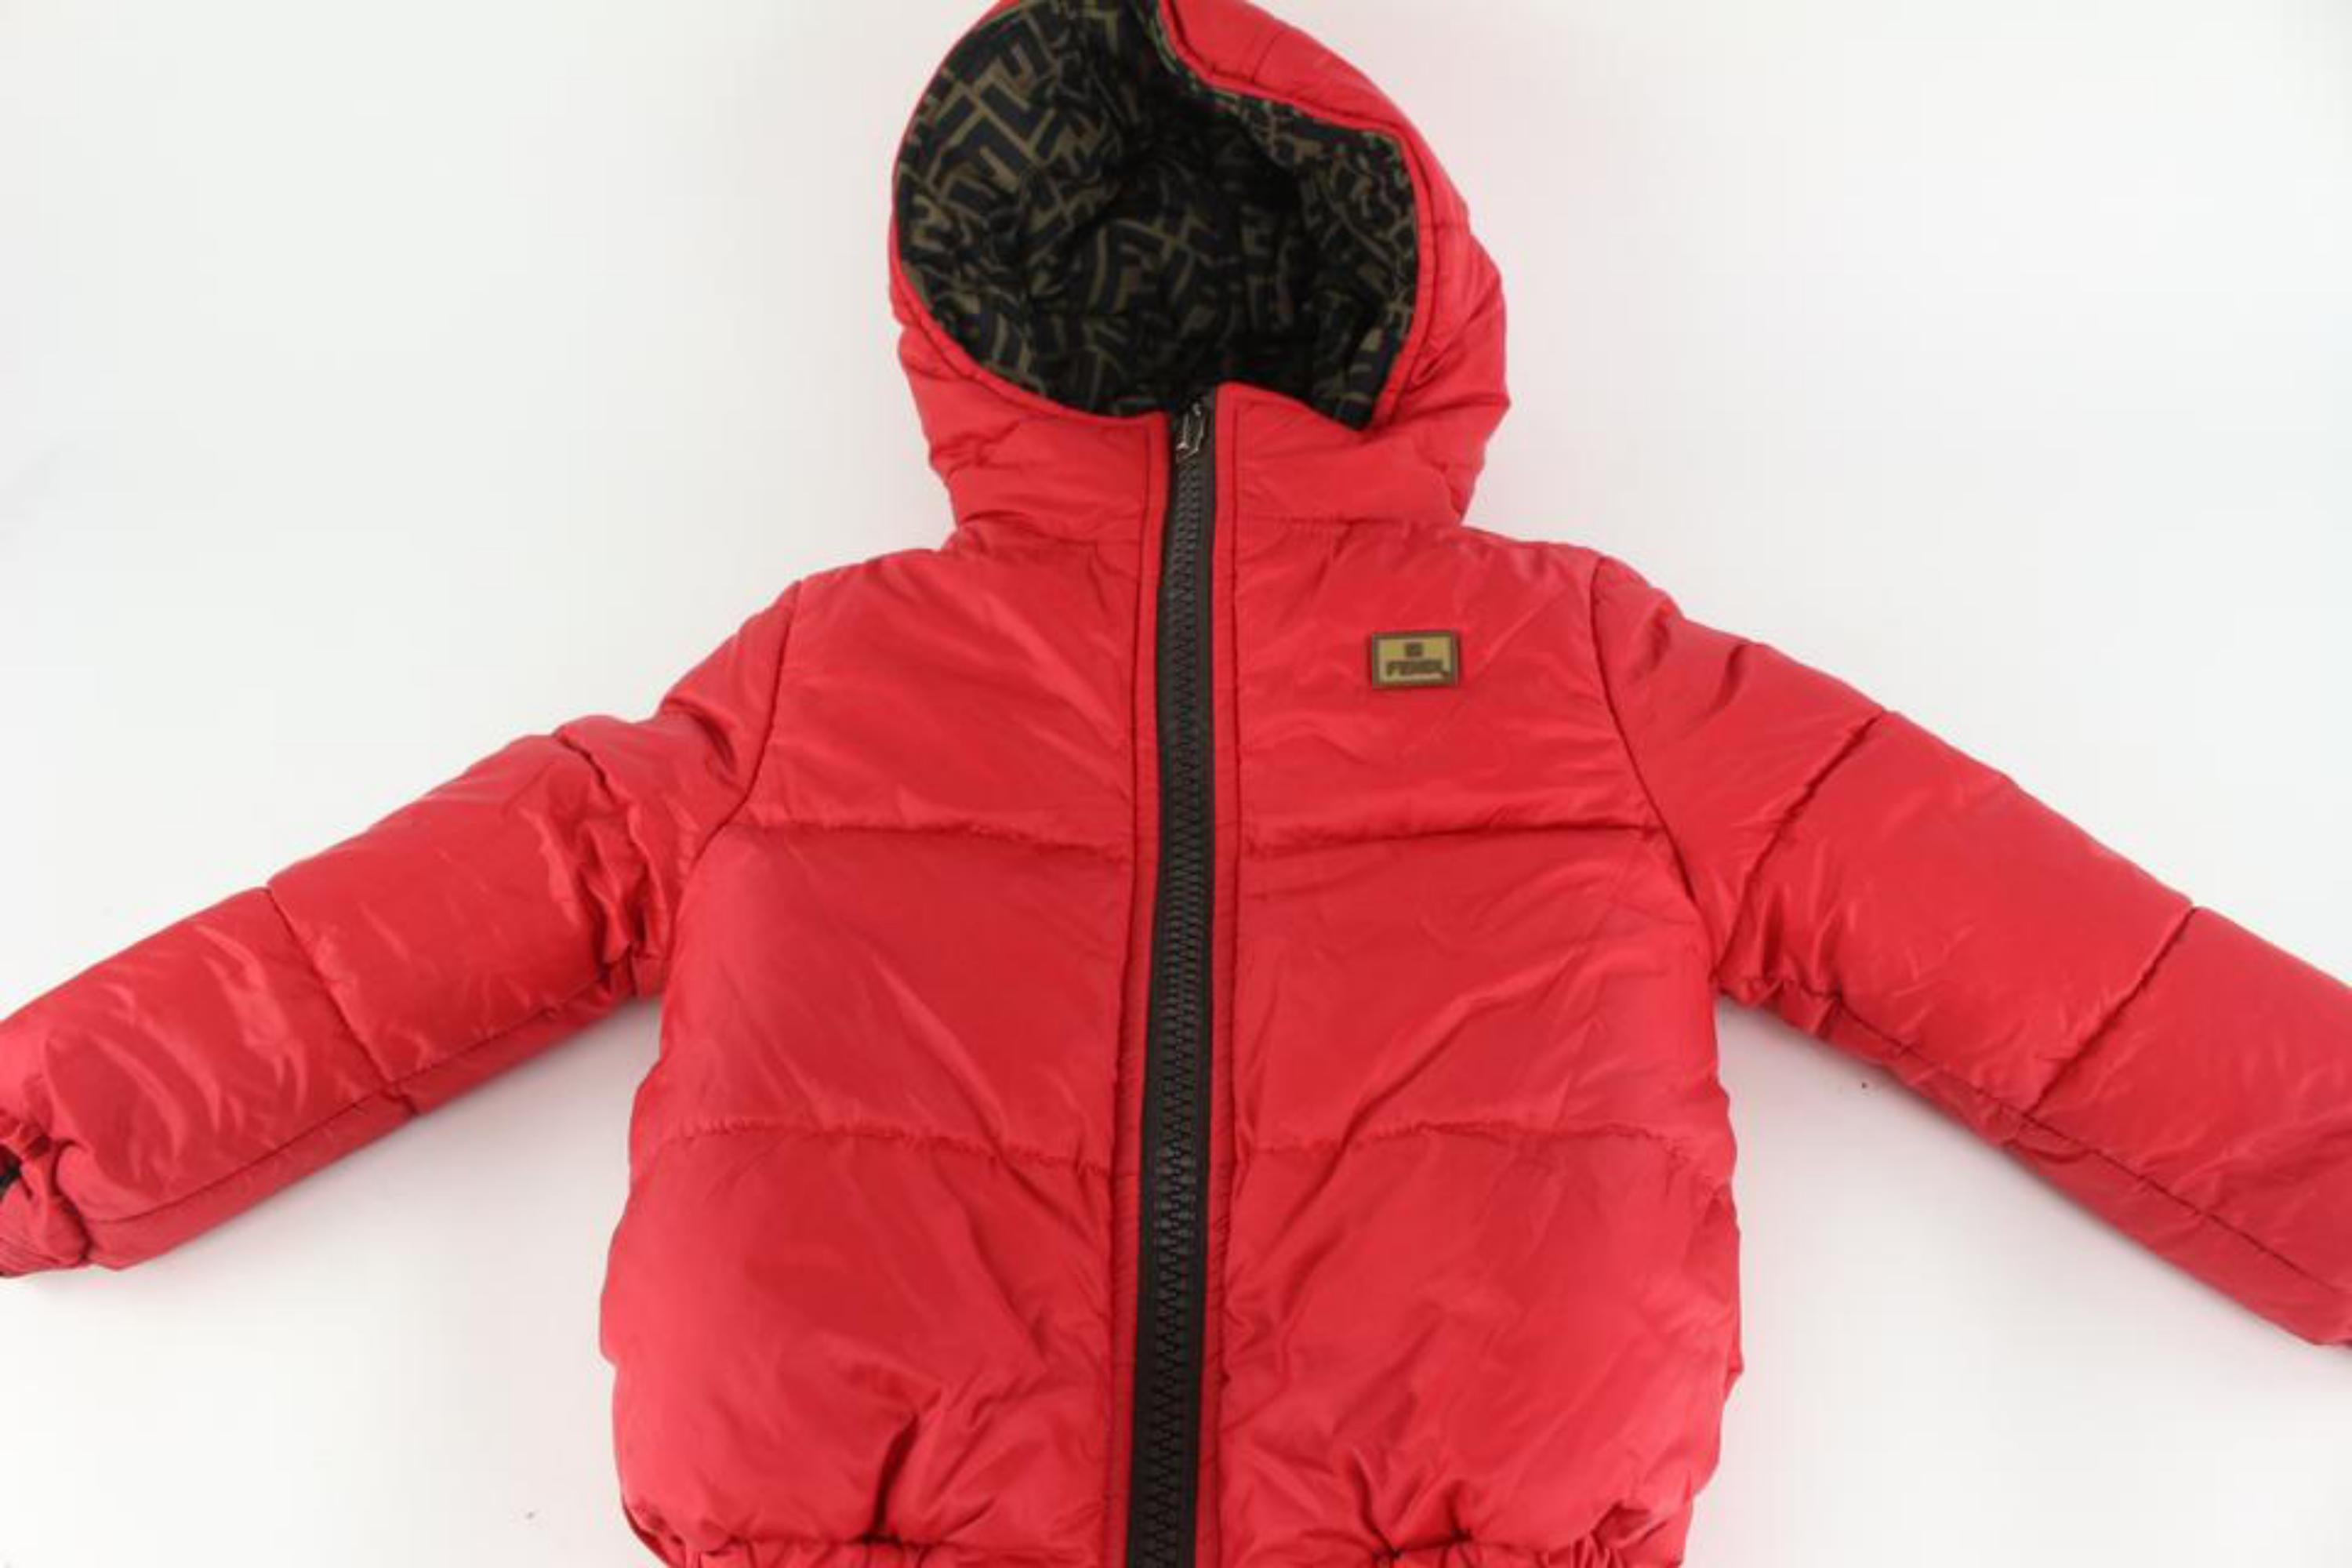 Fendi Size 3T Monogram x Red Puffer Coat Puffy Jacket Toddler Kids 1220f32
Date Code/Serial Number: CA057030791
Made In: Italy
Measurements: Length:  13.5